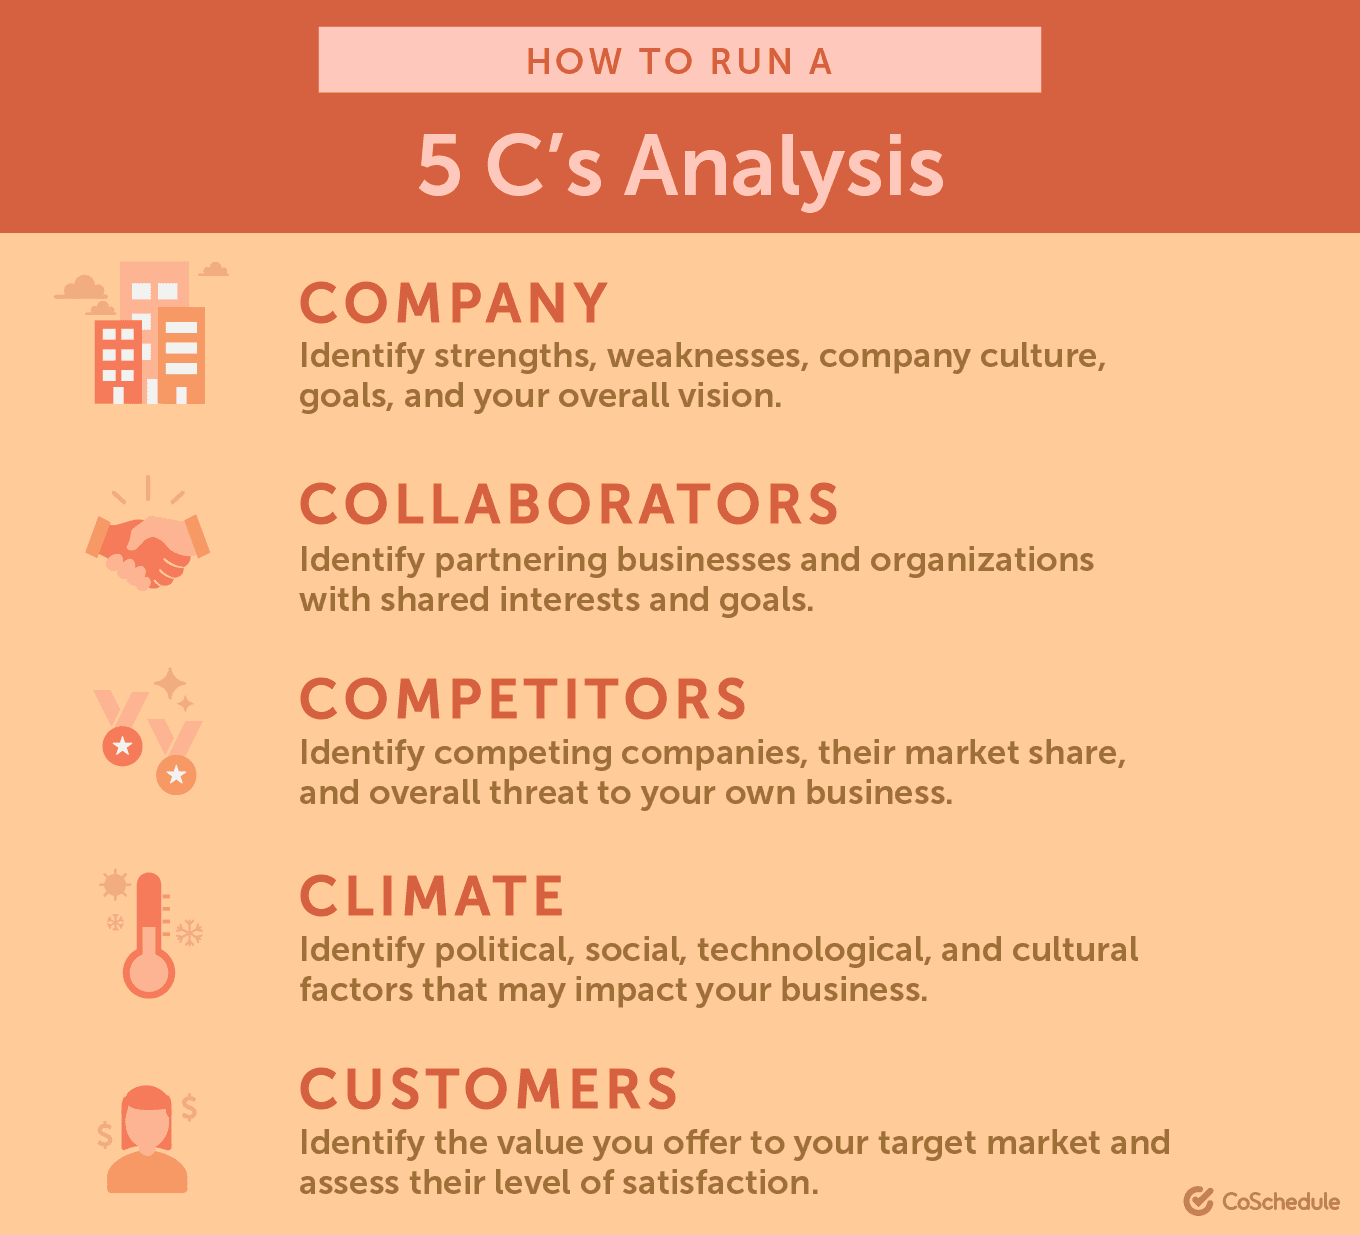 How to run a 5 C's analysis - Company, Collaborators, Competitors, Climate, Customers